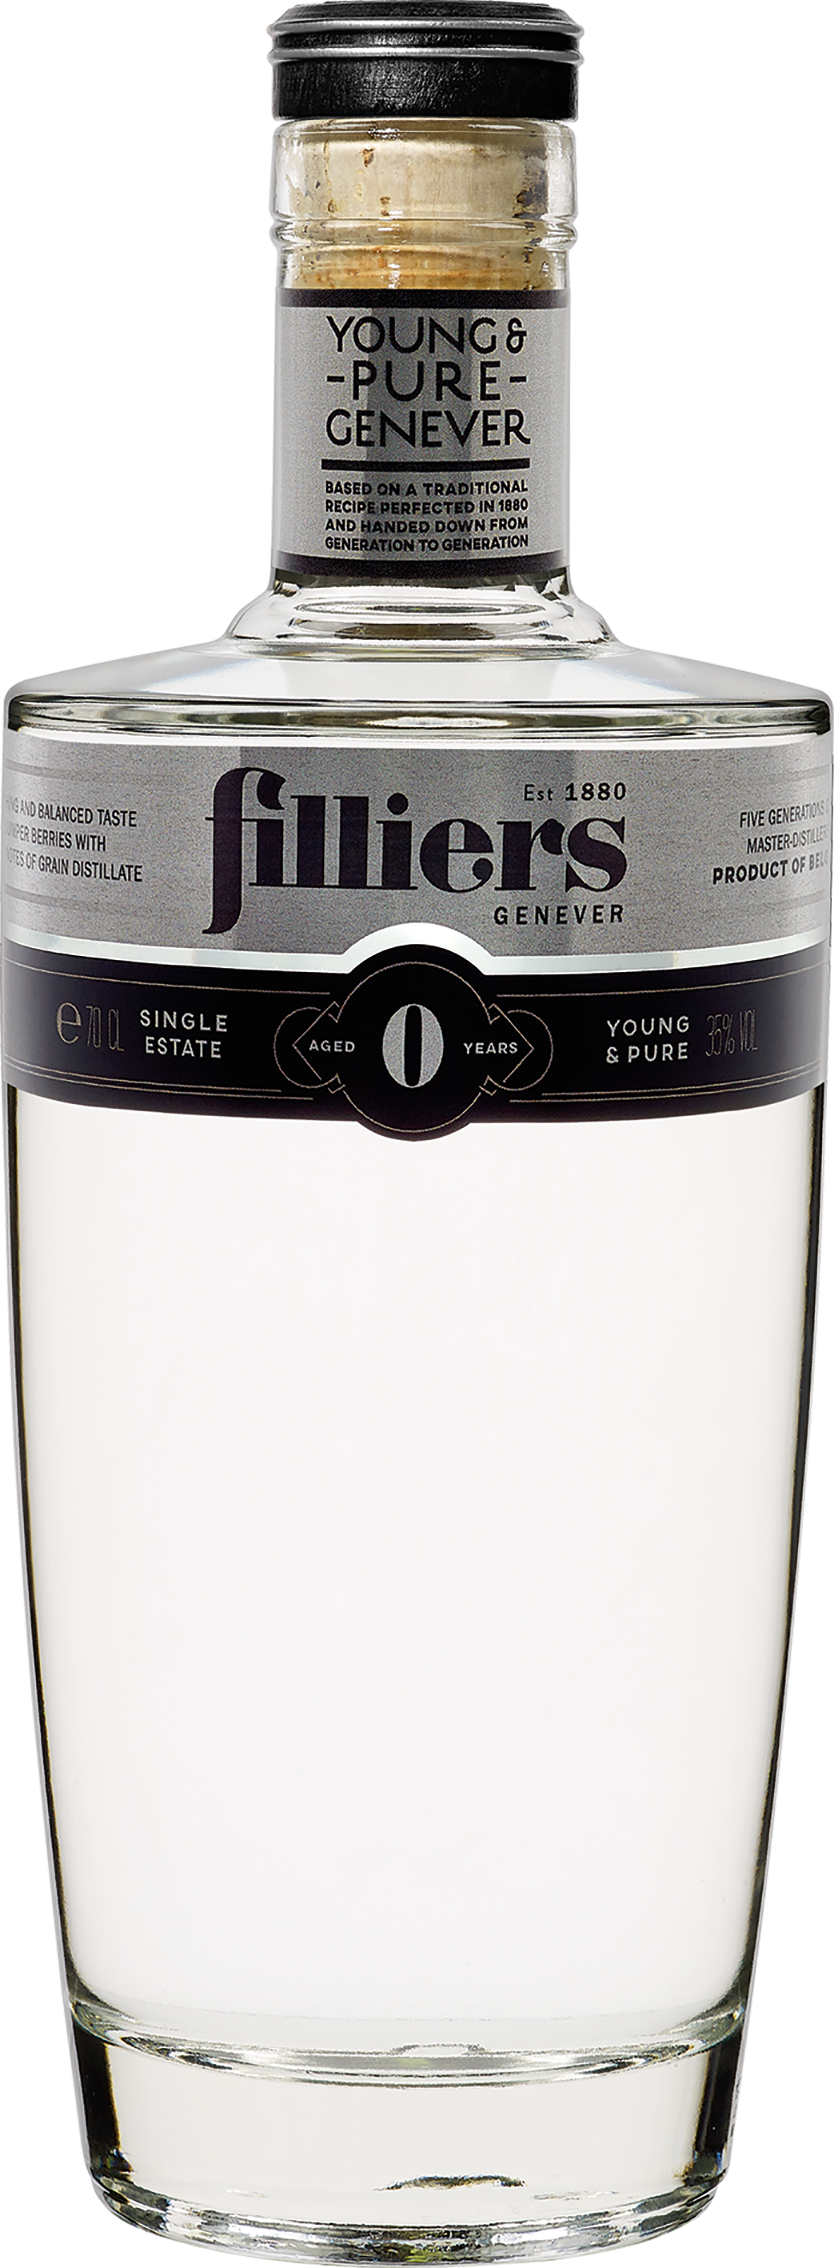 Flasche Filliers Genever young and Pure